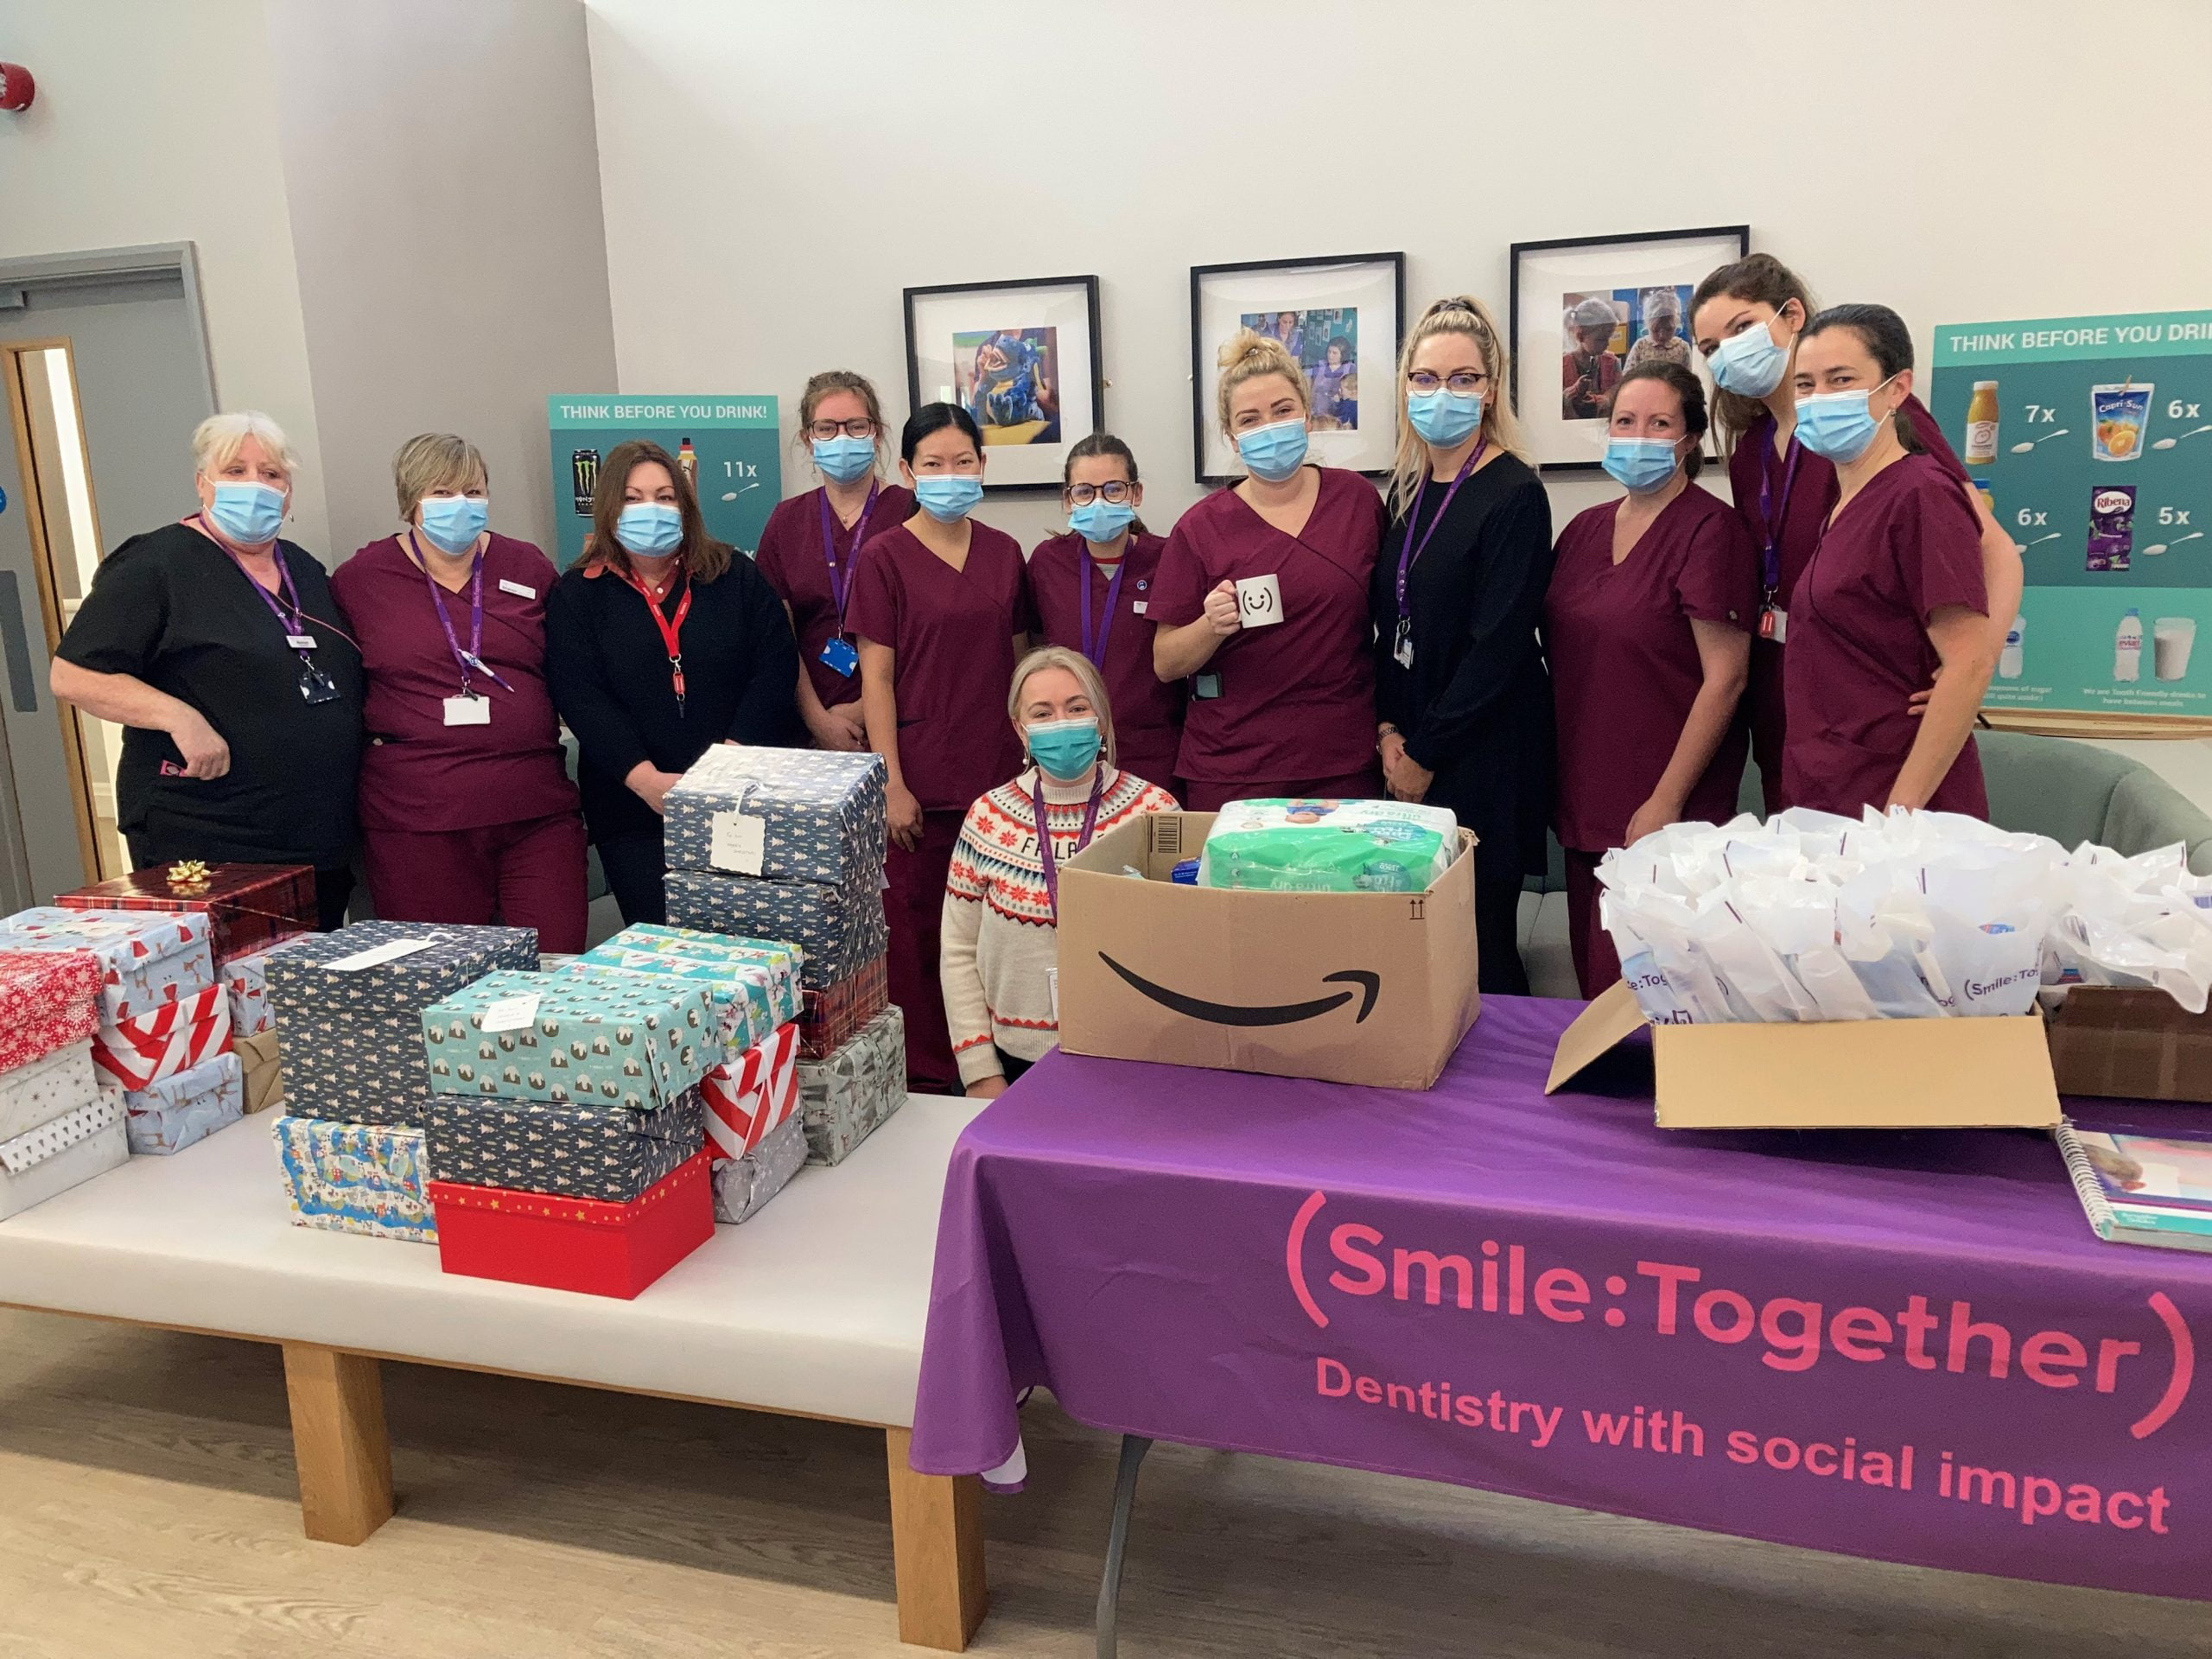 Smile Together dental team masked standing at table with donation boxes and oral health packs